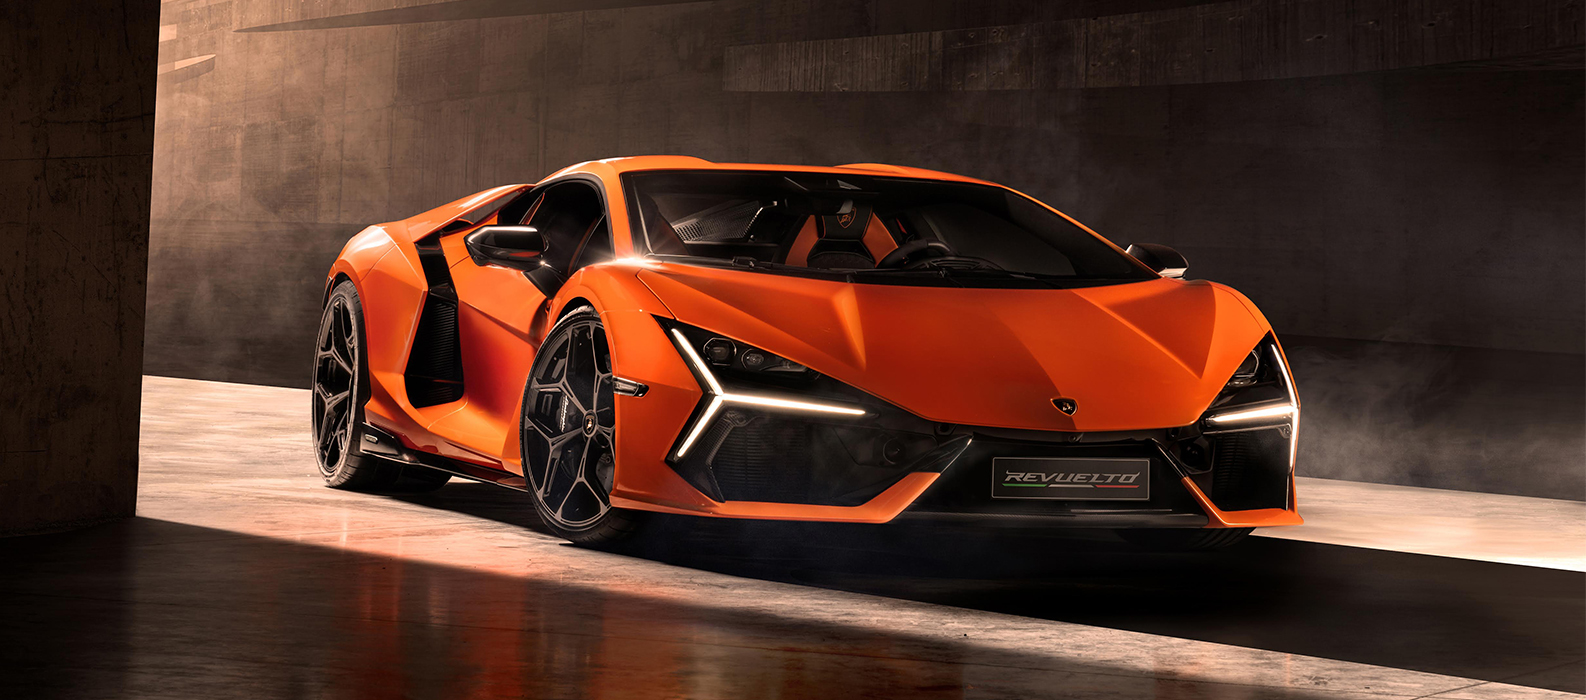 The V-12 Hybrid Sián Is the Most Powerful Lamborghini Ever